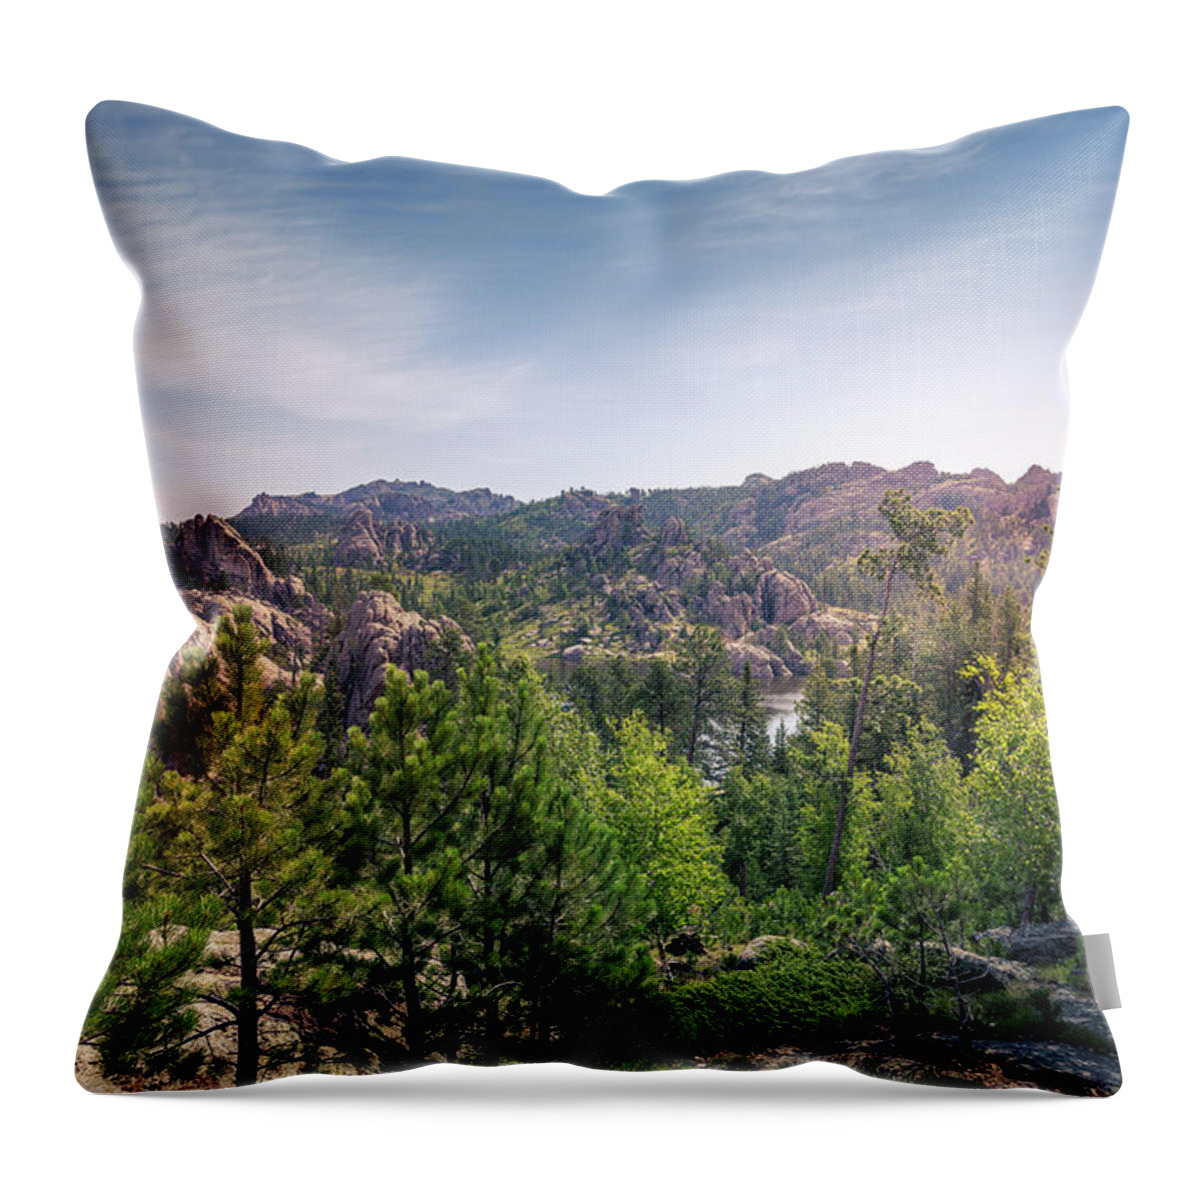 Custer Park Throw Pillow featuring the photograph Custer Park by Chris Spencer